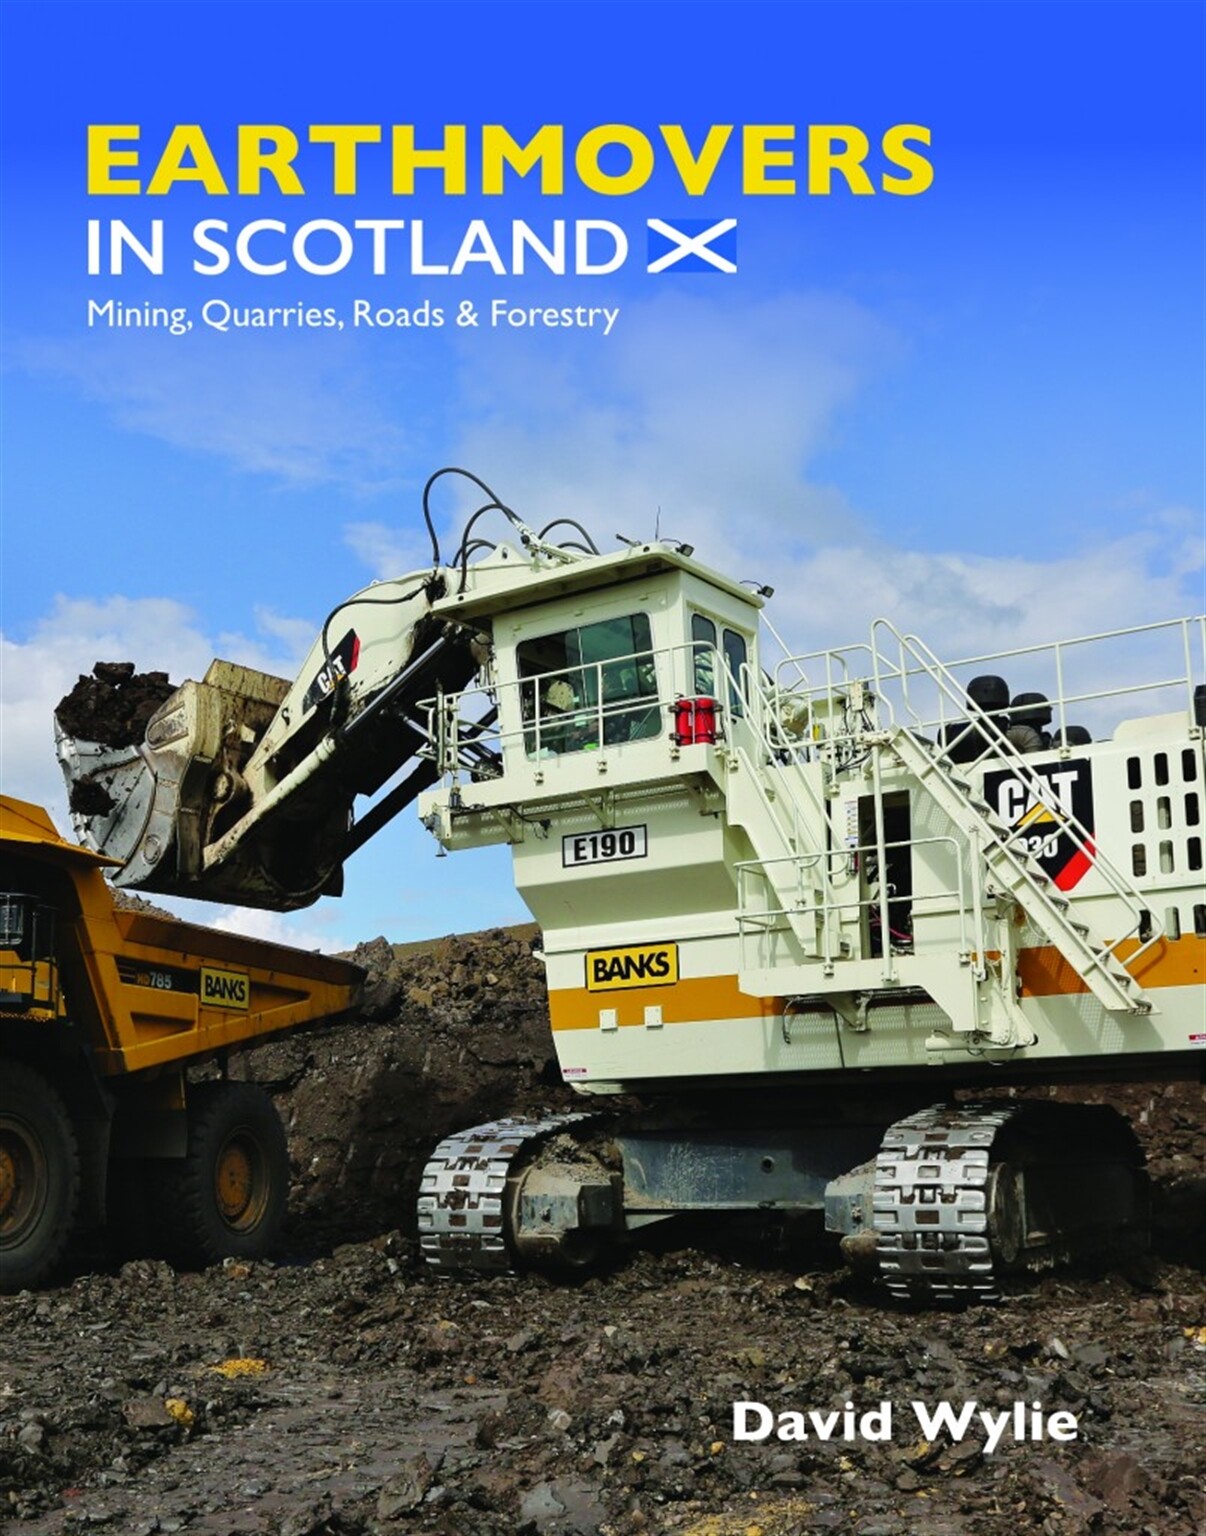 Earthmovers in Scotland a stunning new publication